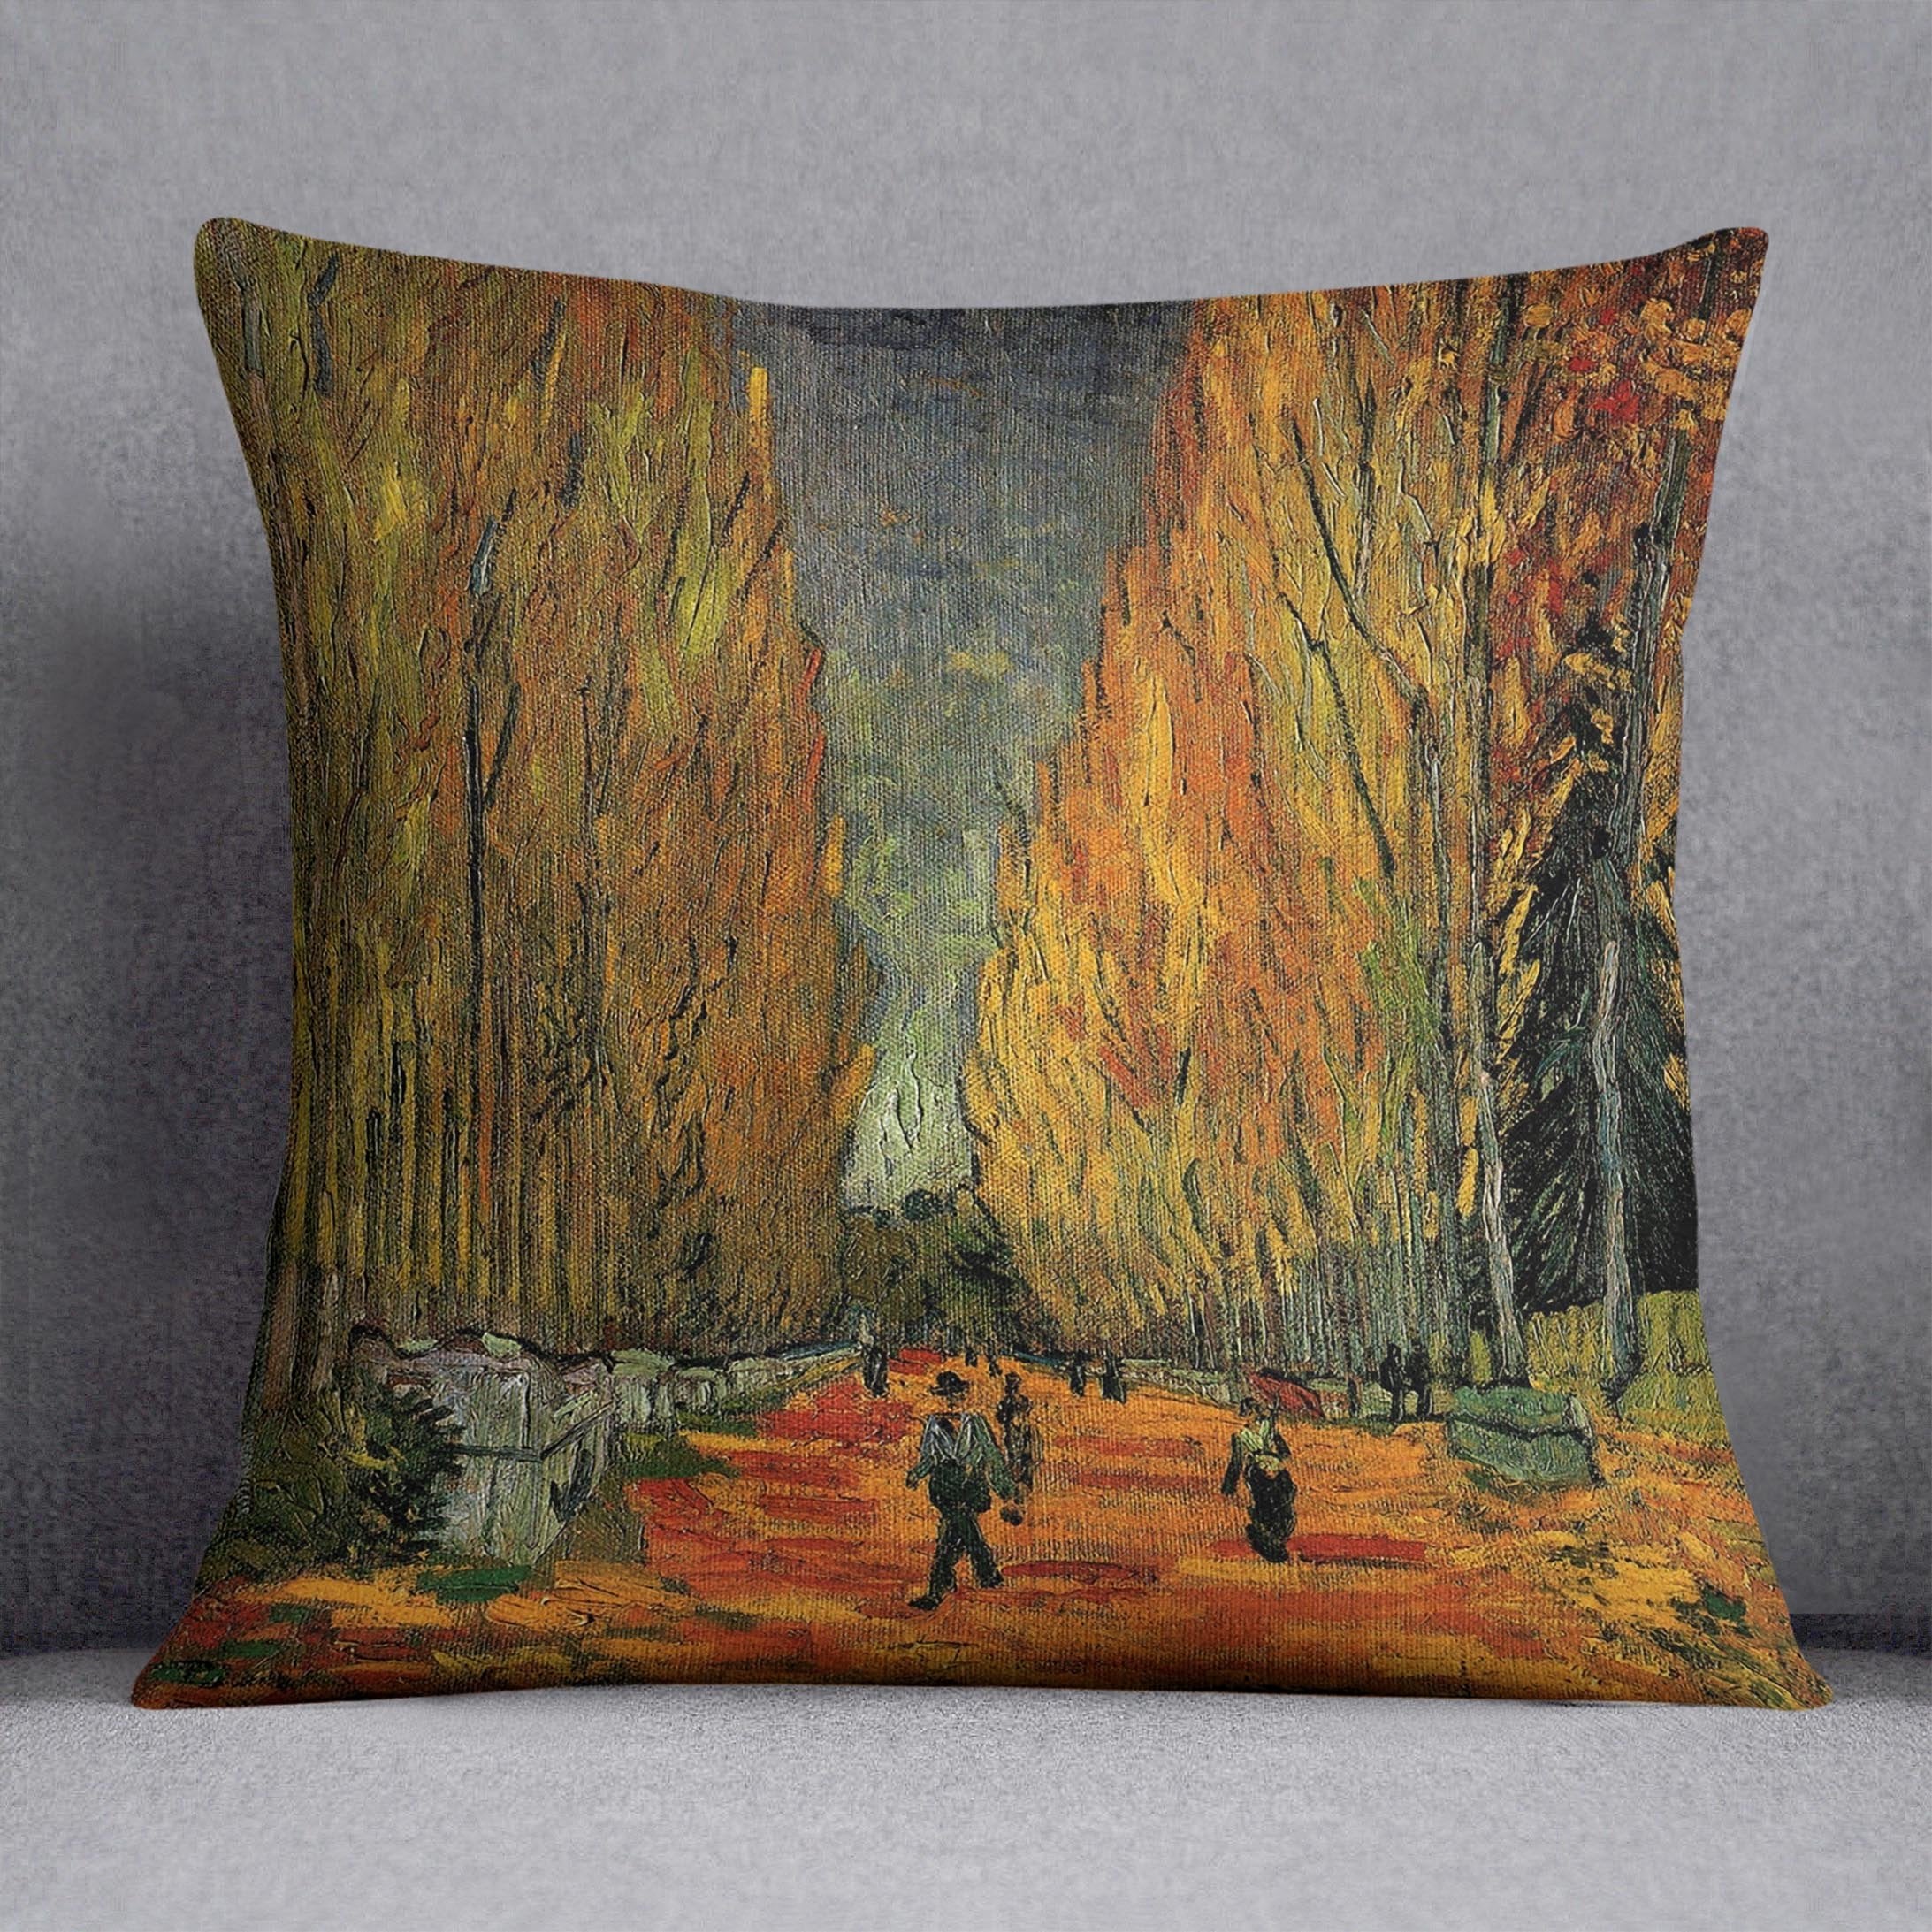 Les Alyscamps 3 by Van Gogh Throw Pillow